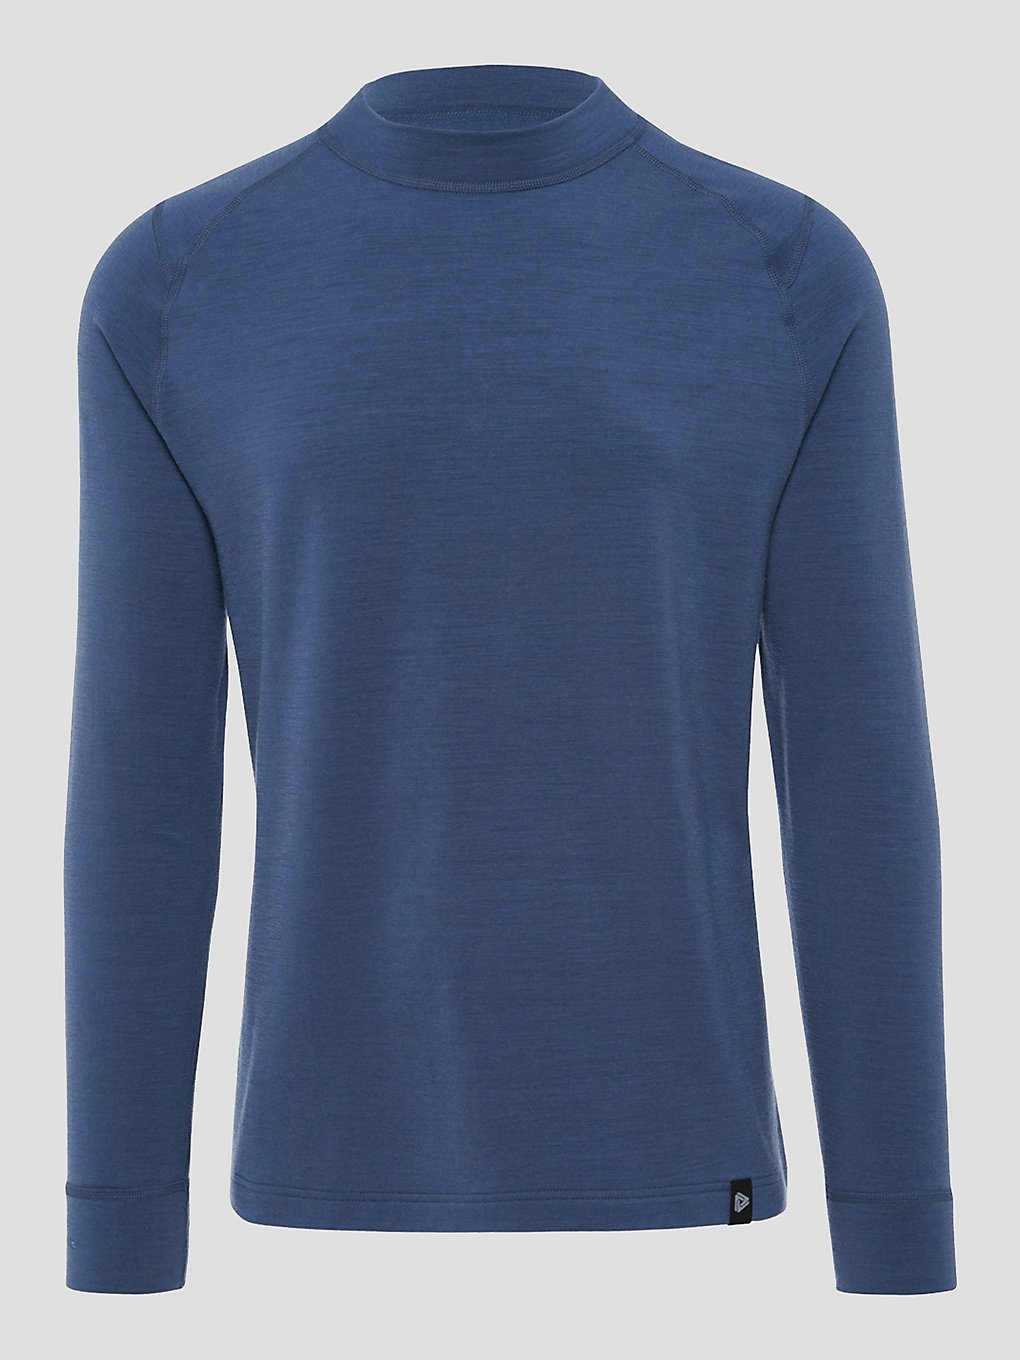 Thermowave Thermo shirt blauw